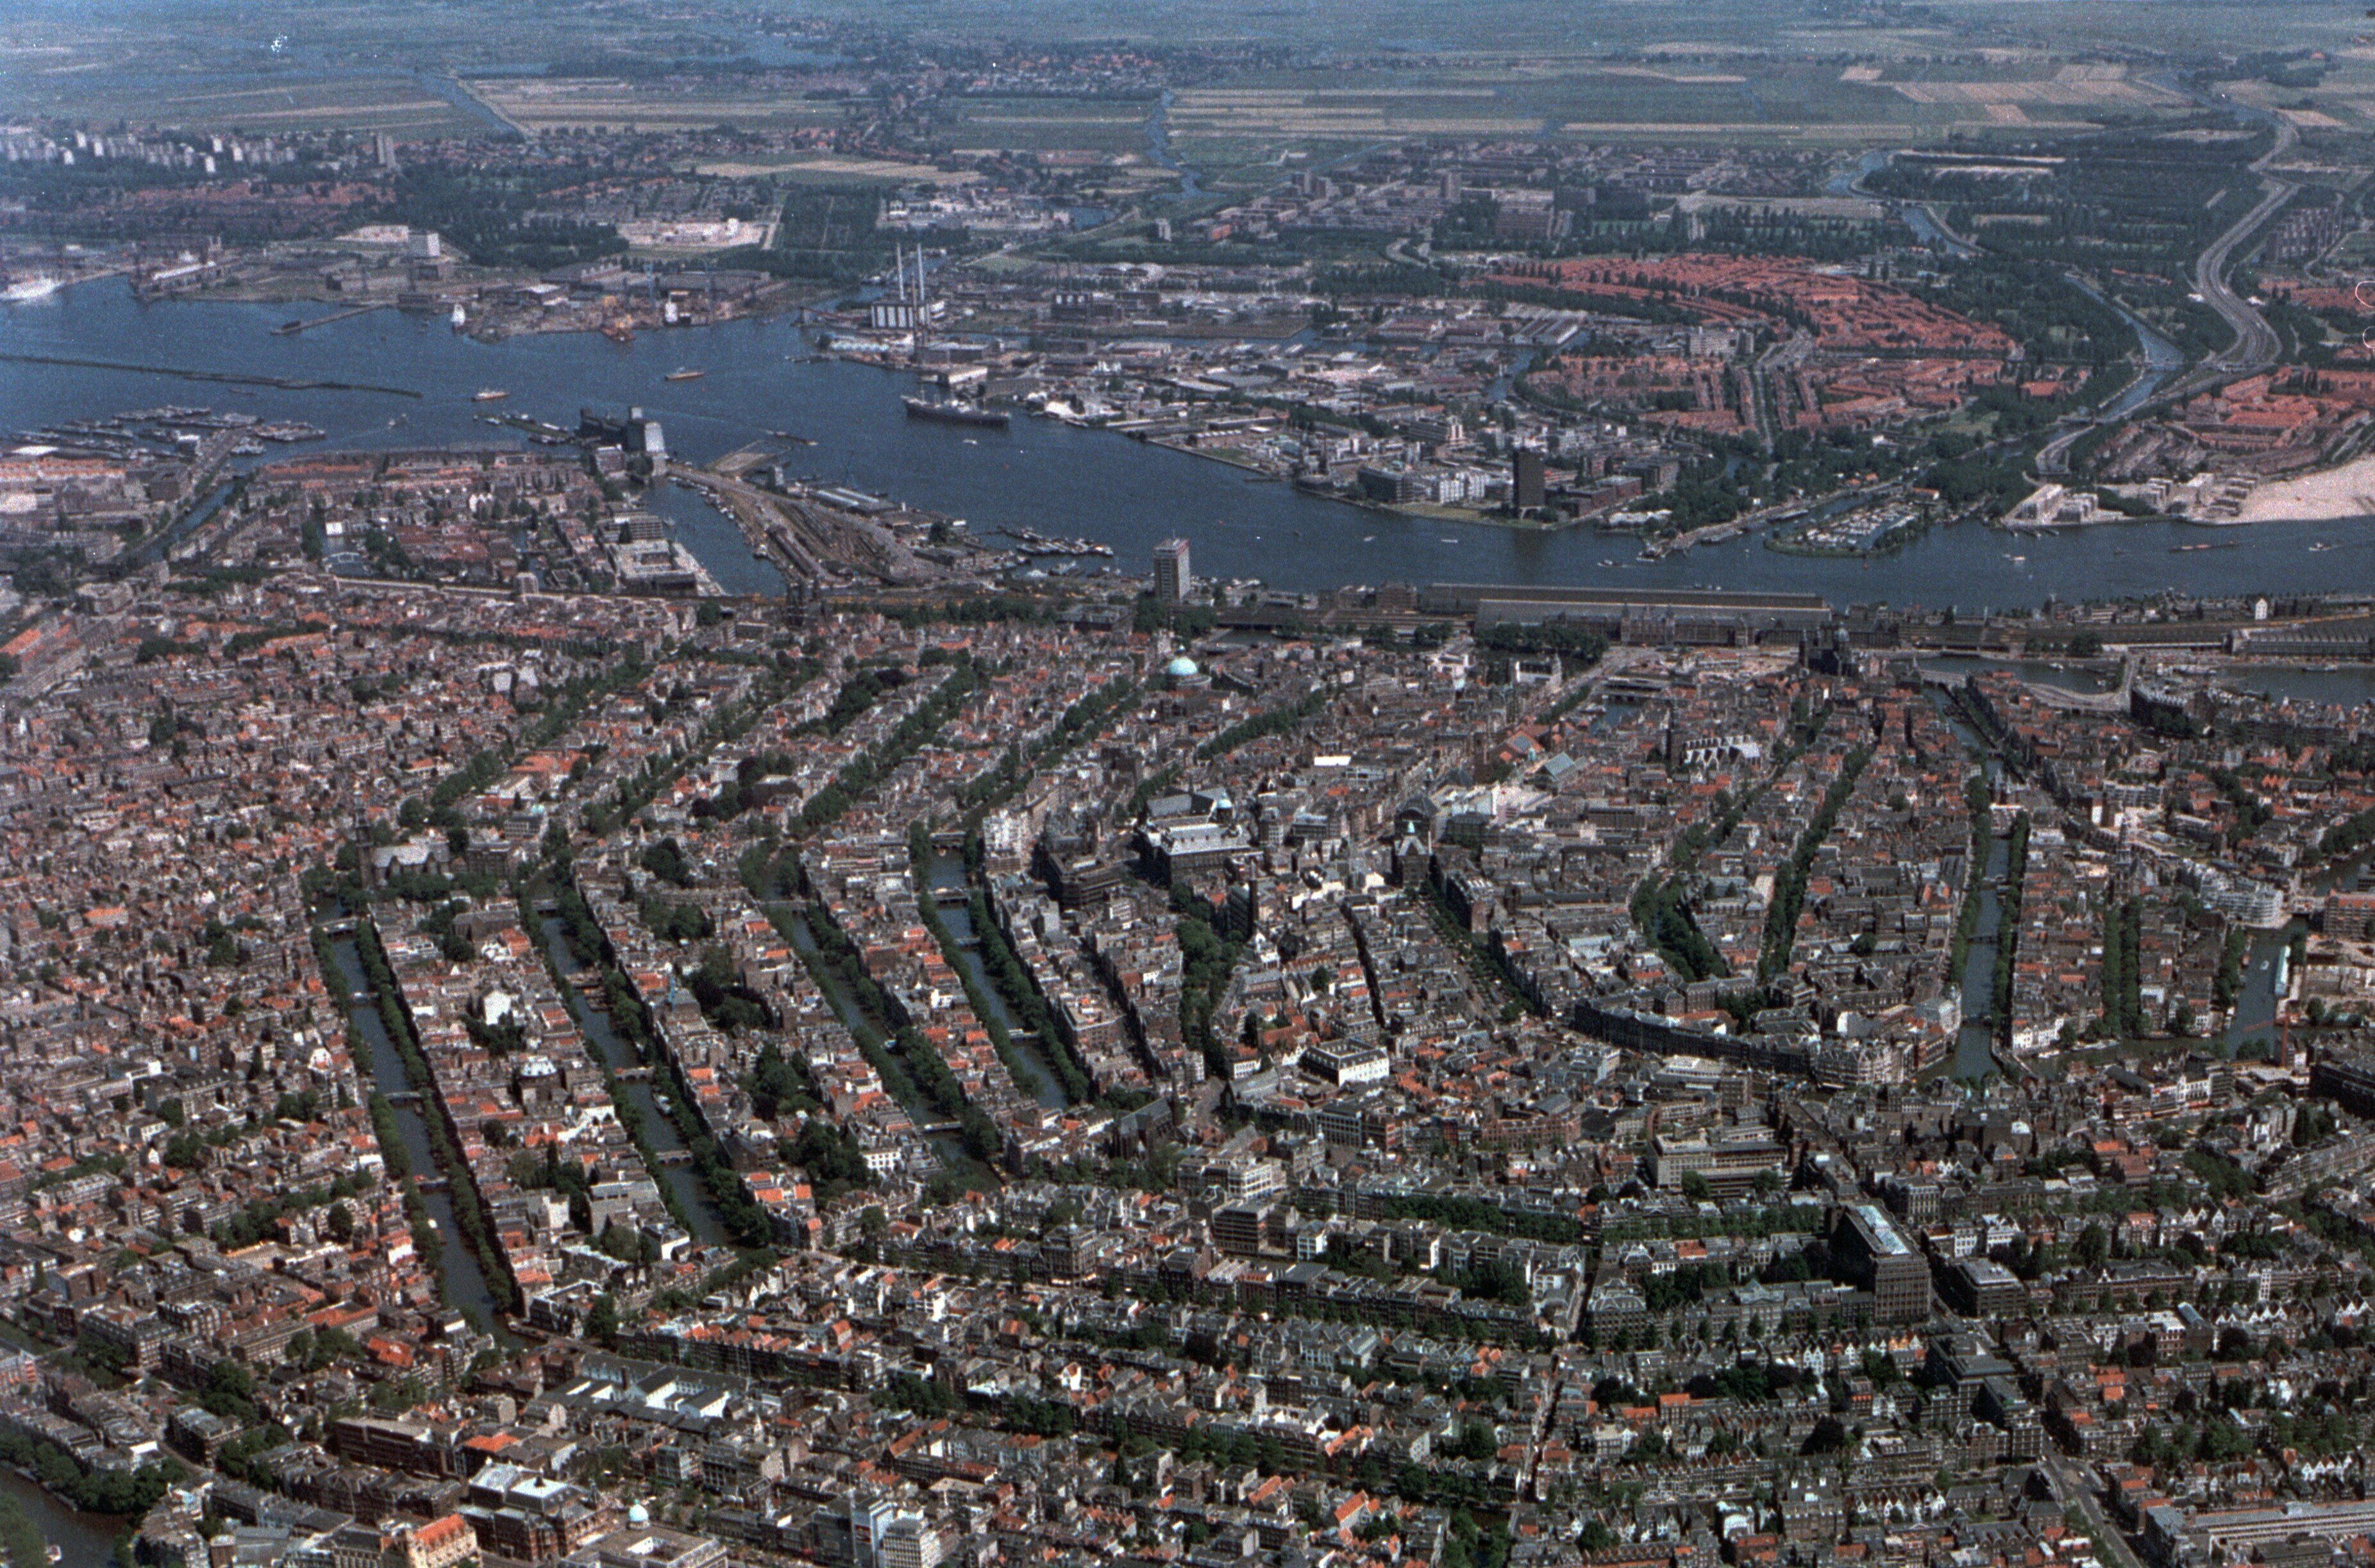 An aerial photograph of the canals of Amsterdam